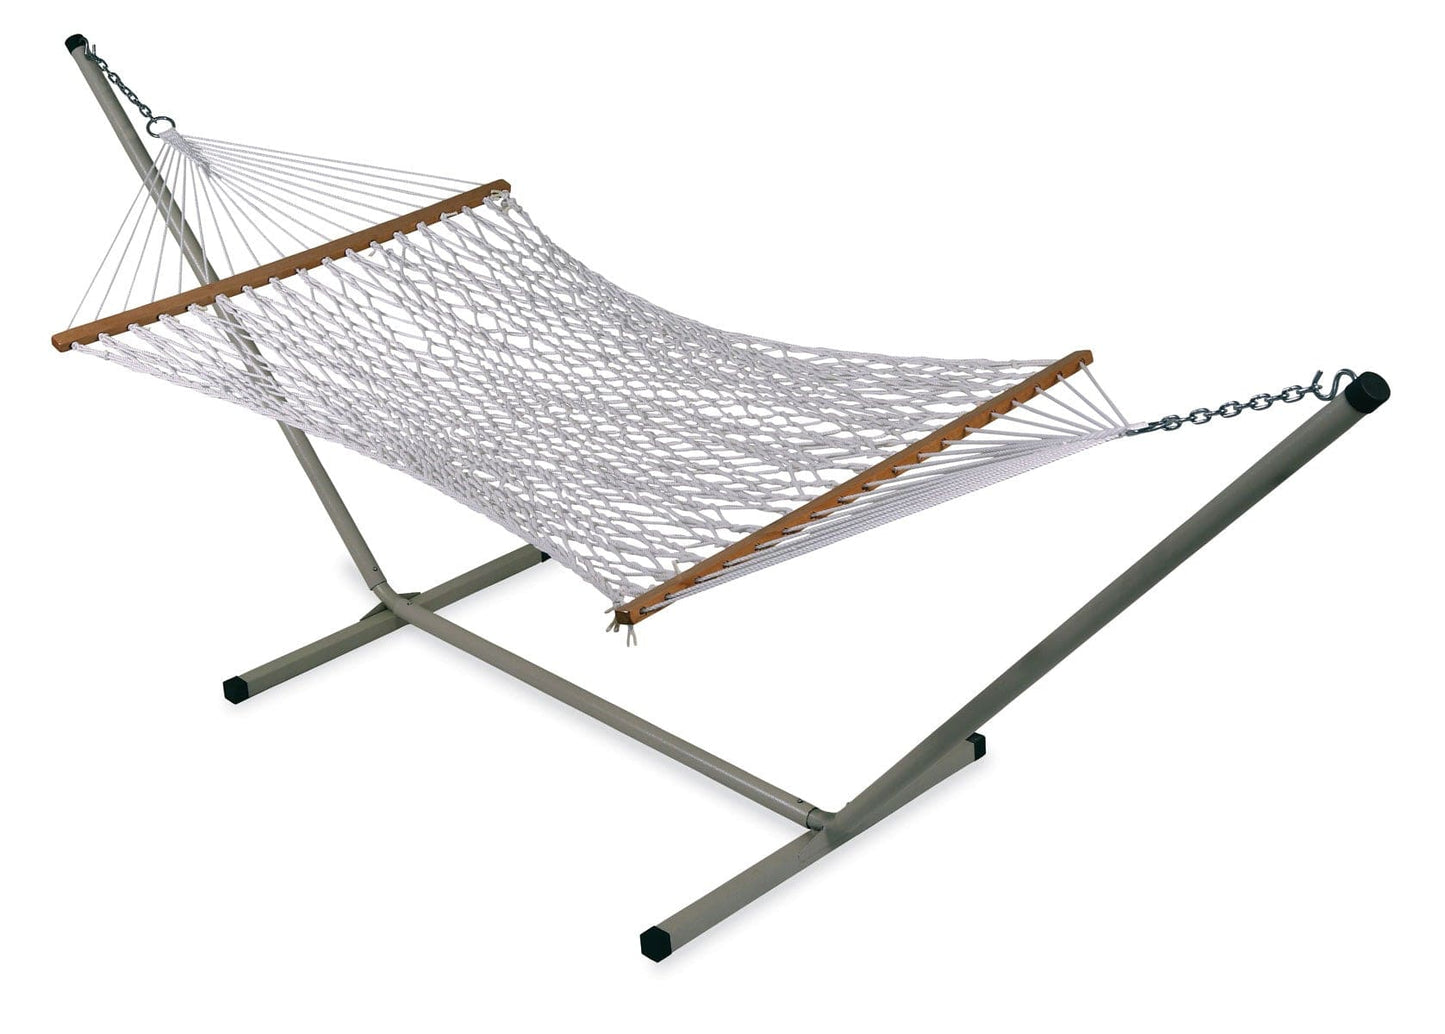 Outdoor UV Resistant White Rope Hammock With Grey Steel Hammock Stand, Weight Capacity of 125 kg